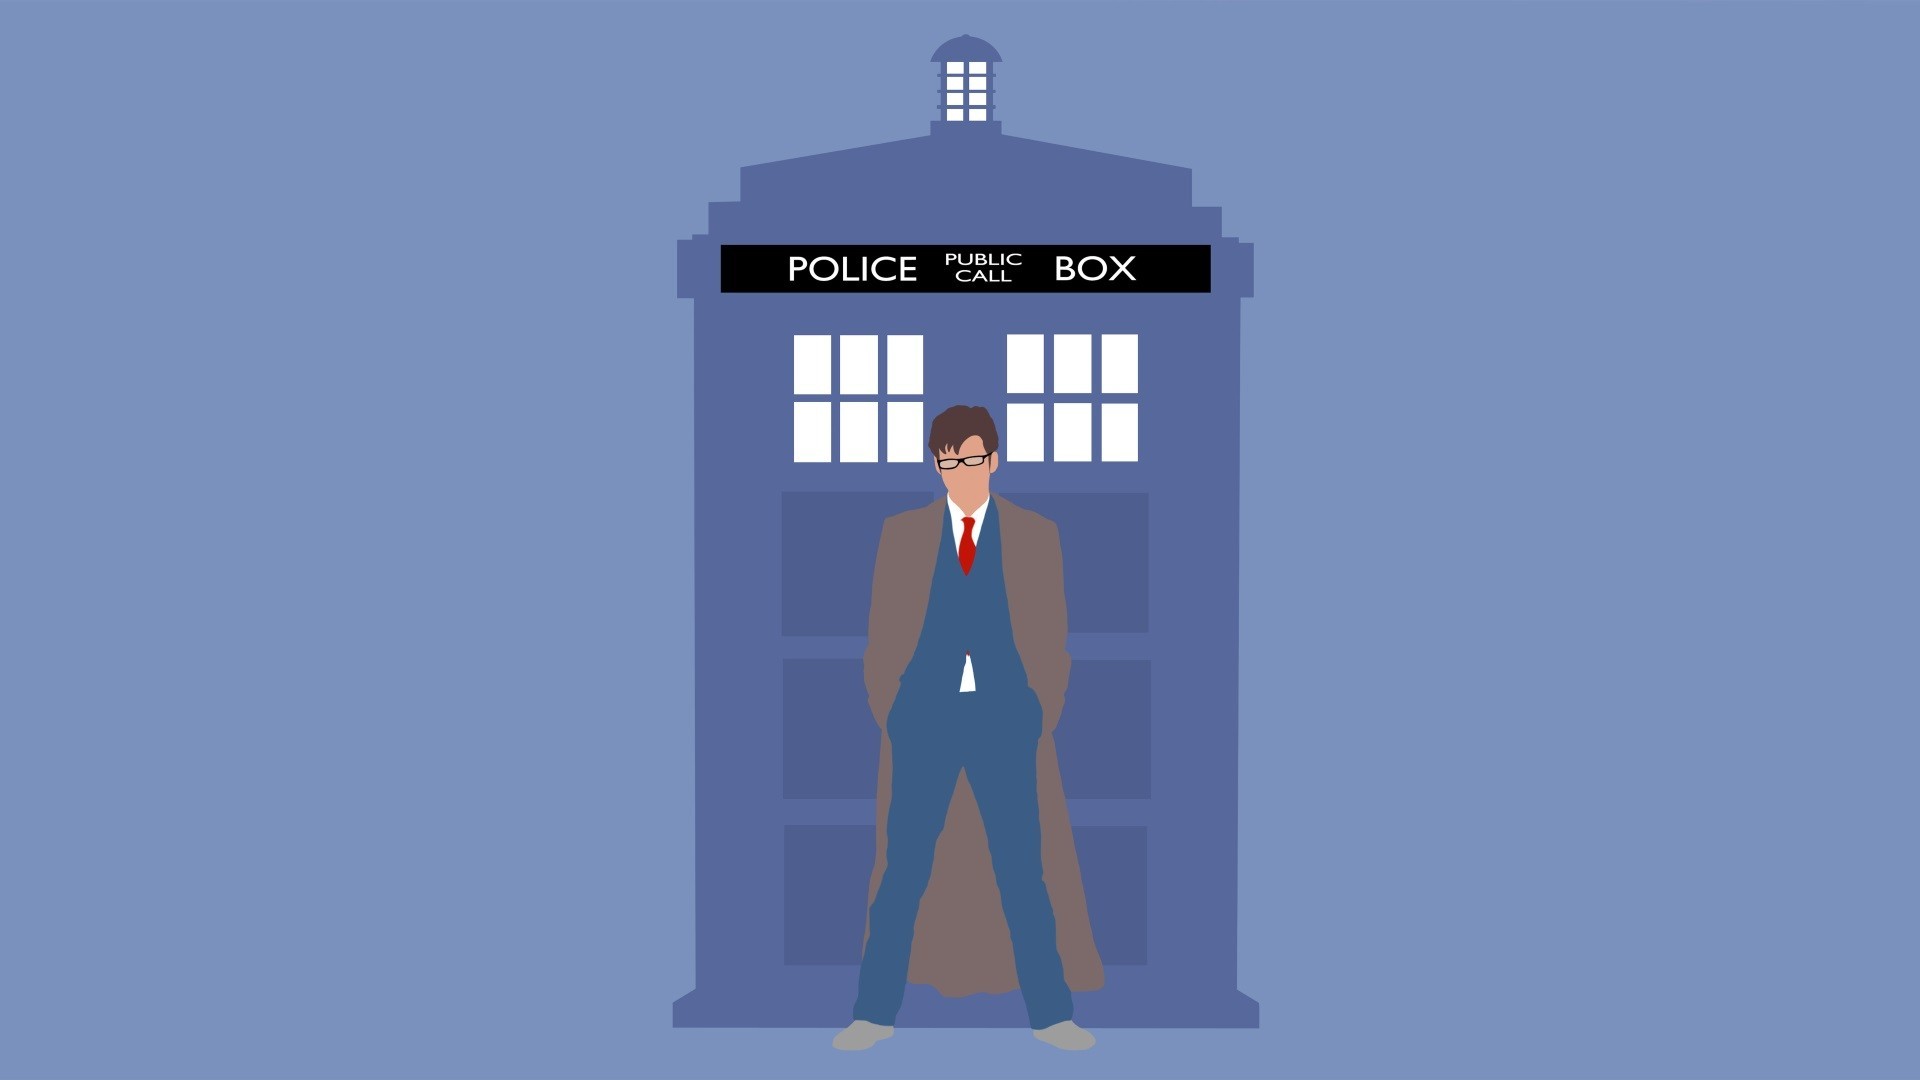 Doctor Who 10th Doctor Wallpaper 67 Pictures